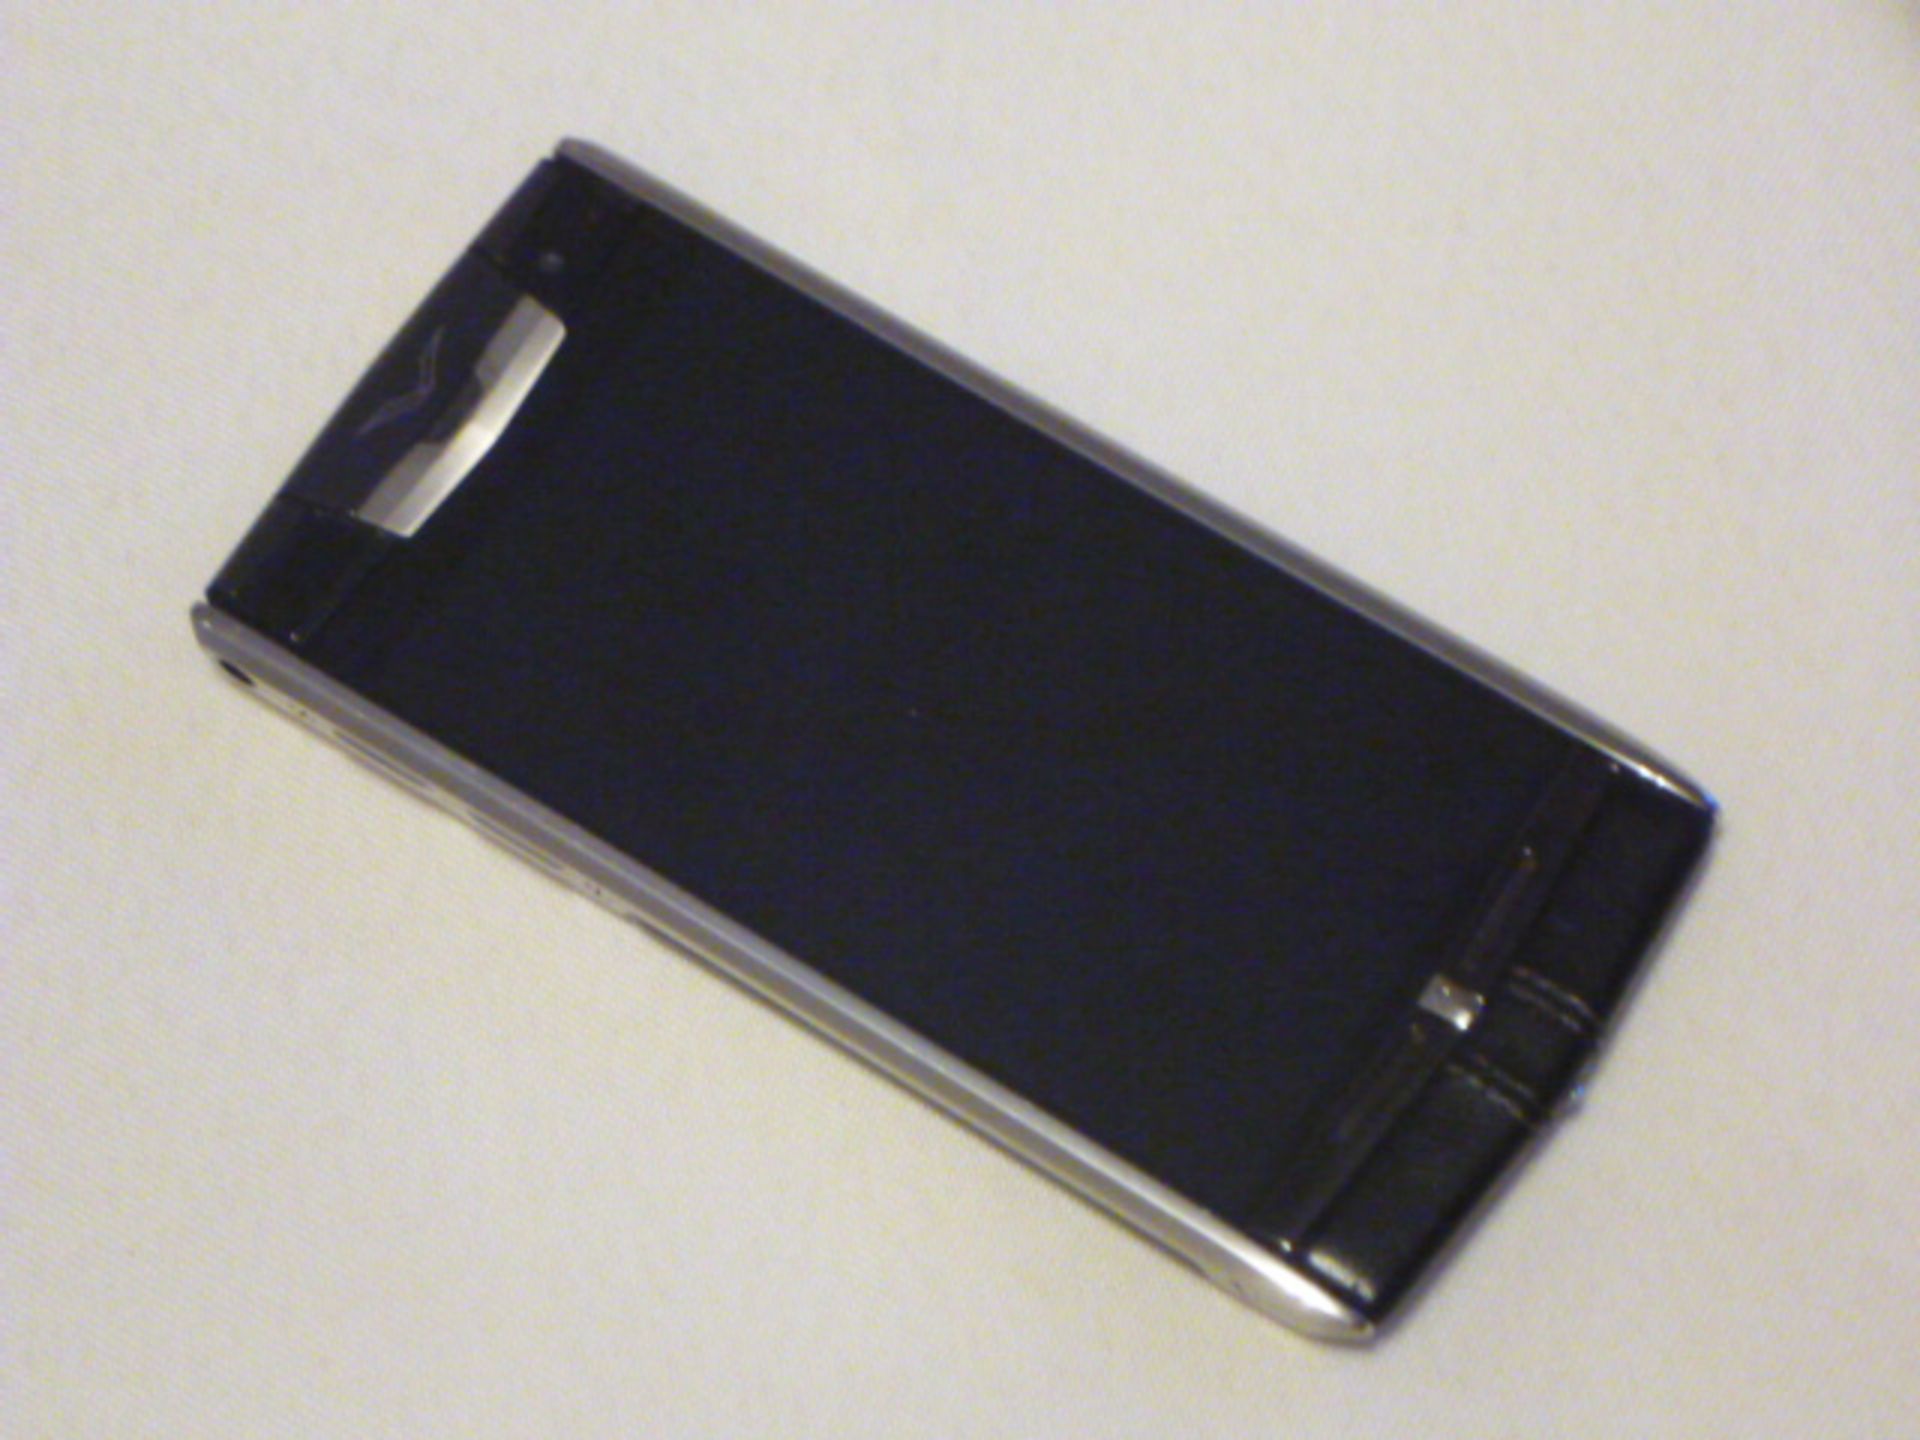 Vertu Signature Touch, Jet Calf. Demonstrator, S/N E-001276 Tested Working, but without Warranty